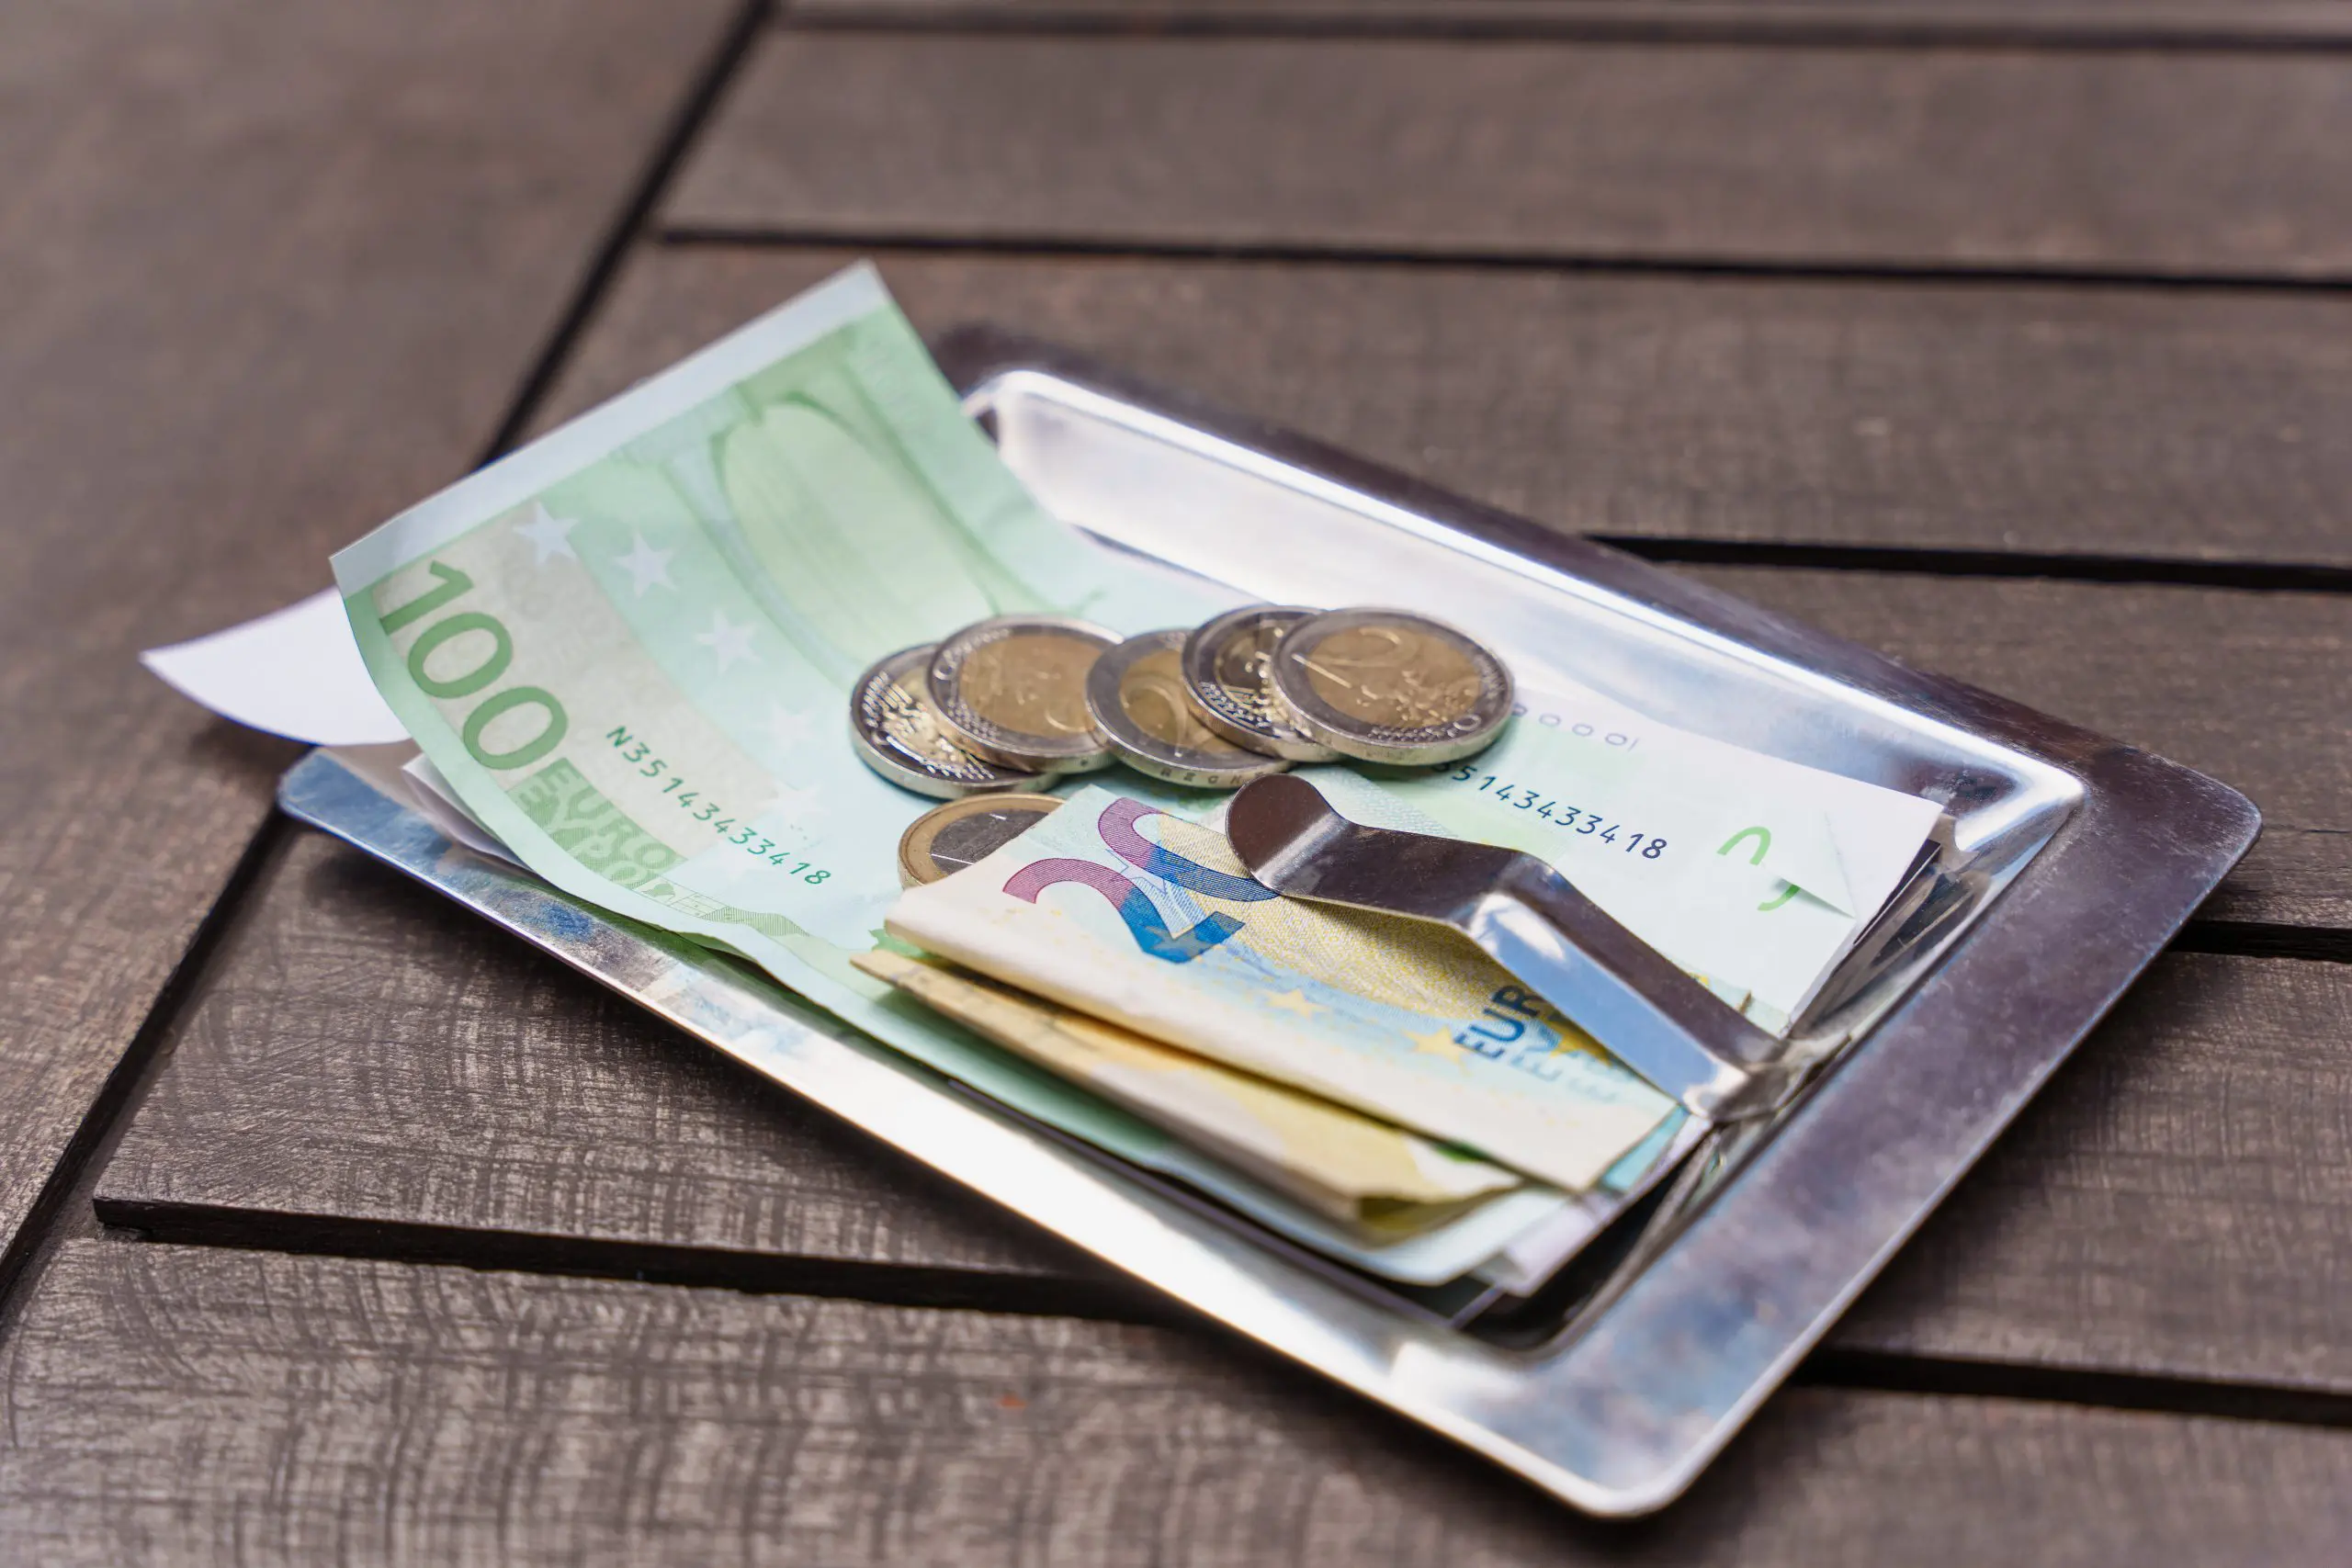 Euros arranged on a small tray, indicating a payment or tip left on a wooden table for private tours.